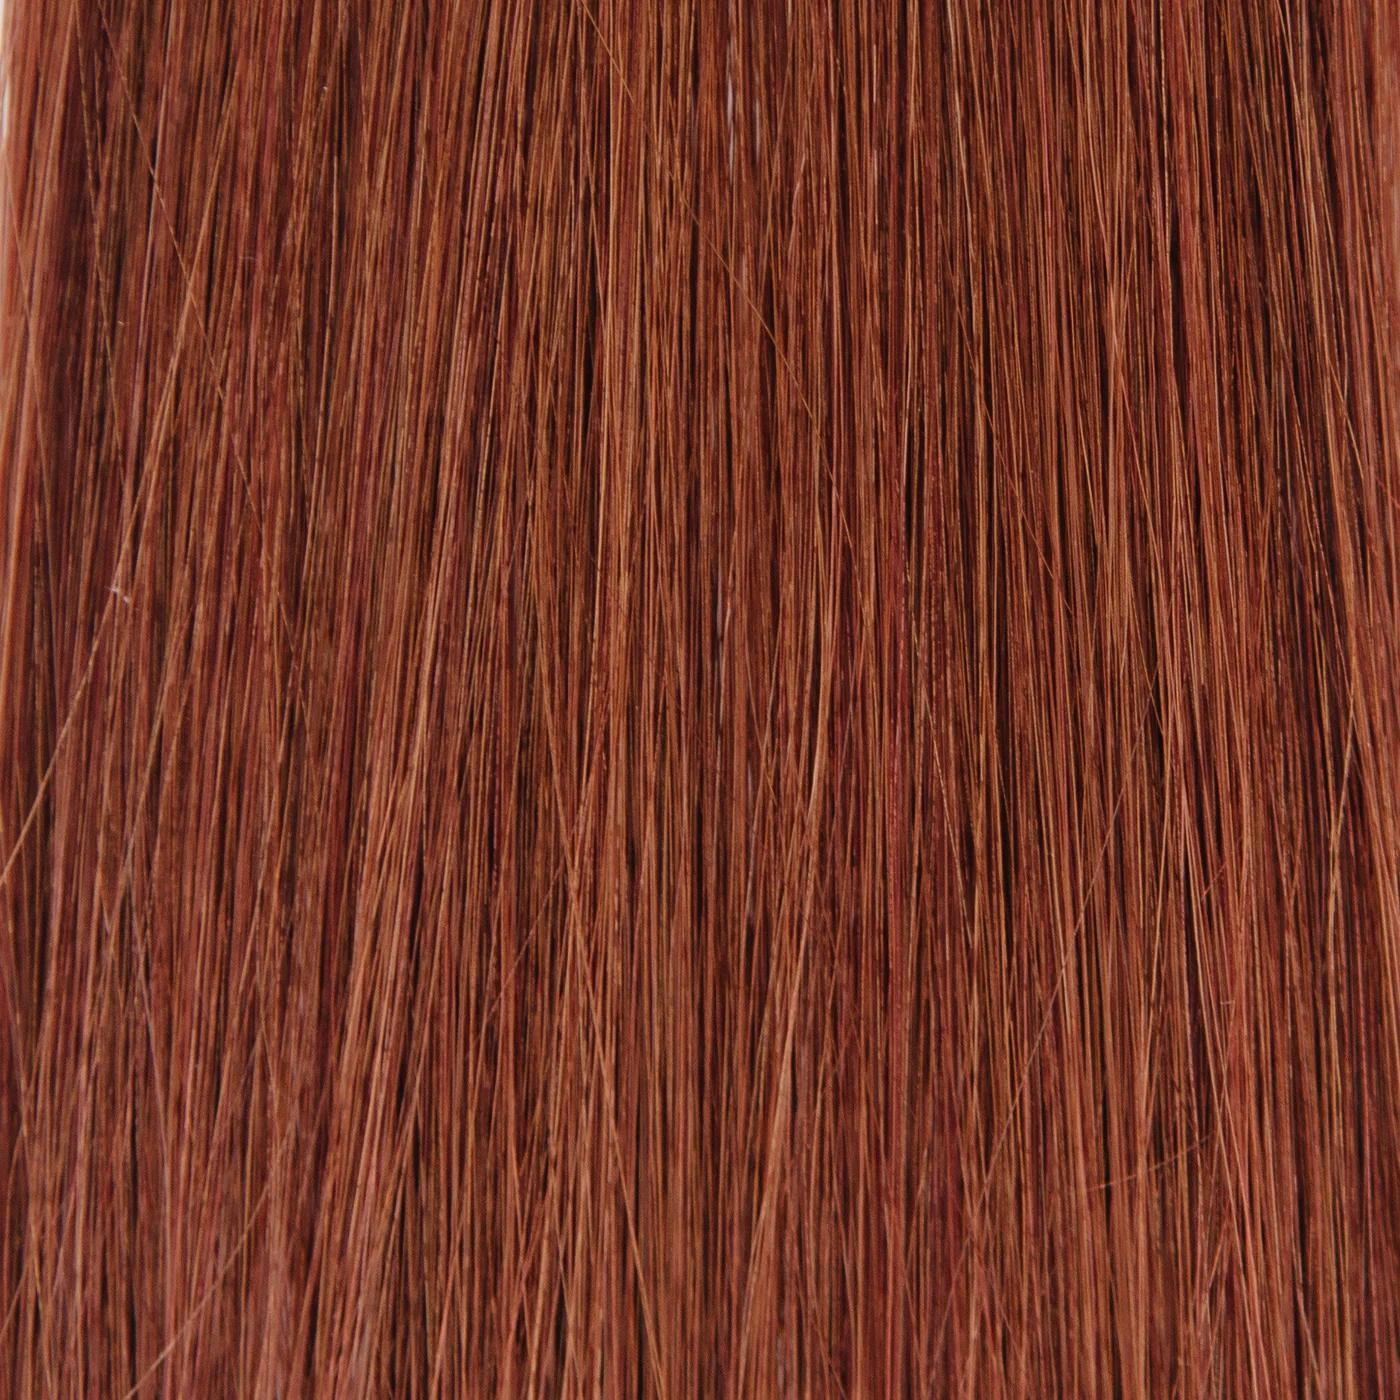 Laced Hair Hand Tied Weft Extensions #35